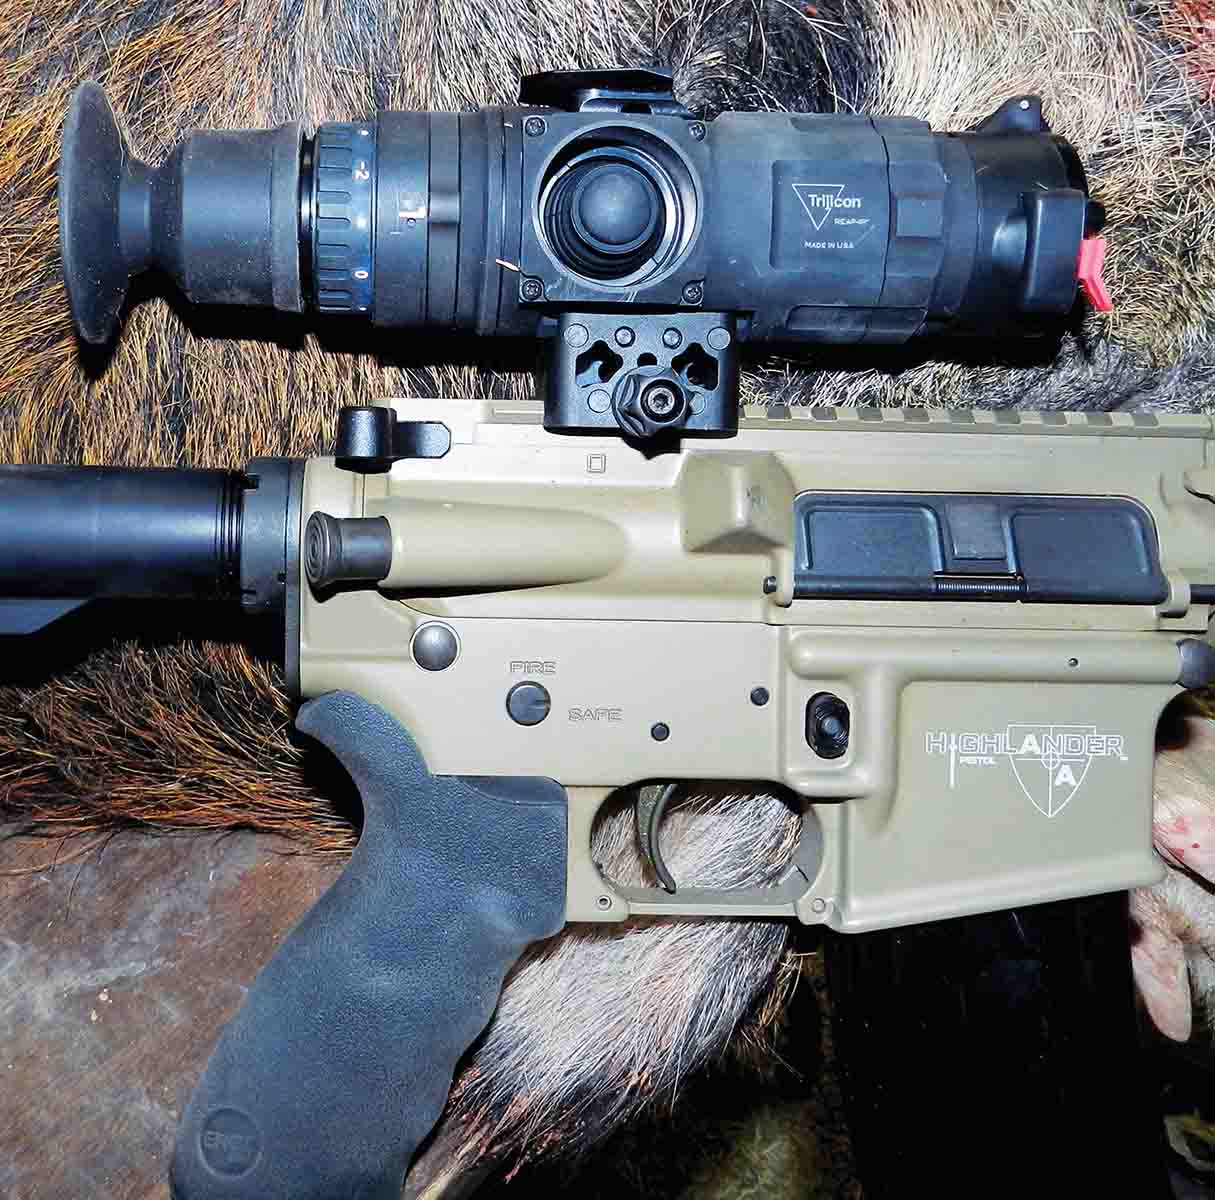 Patrick installed Trijicon’s REAP-IR 35mm Mini Thermal Riflescope on an Alexander Arms Highlander .300 Blackout Pistol with a suppressor to cull about 50 hogs in a four-day period.